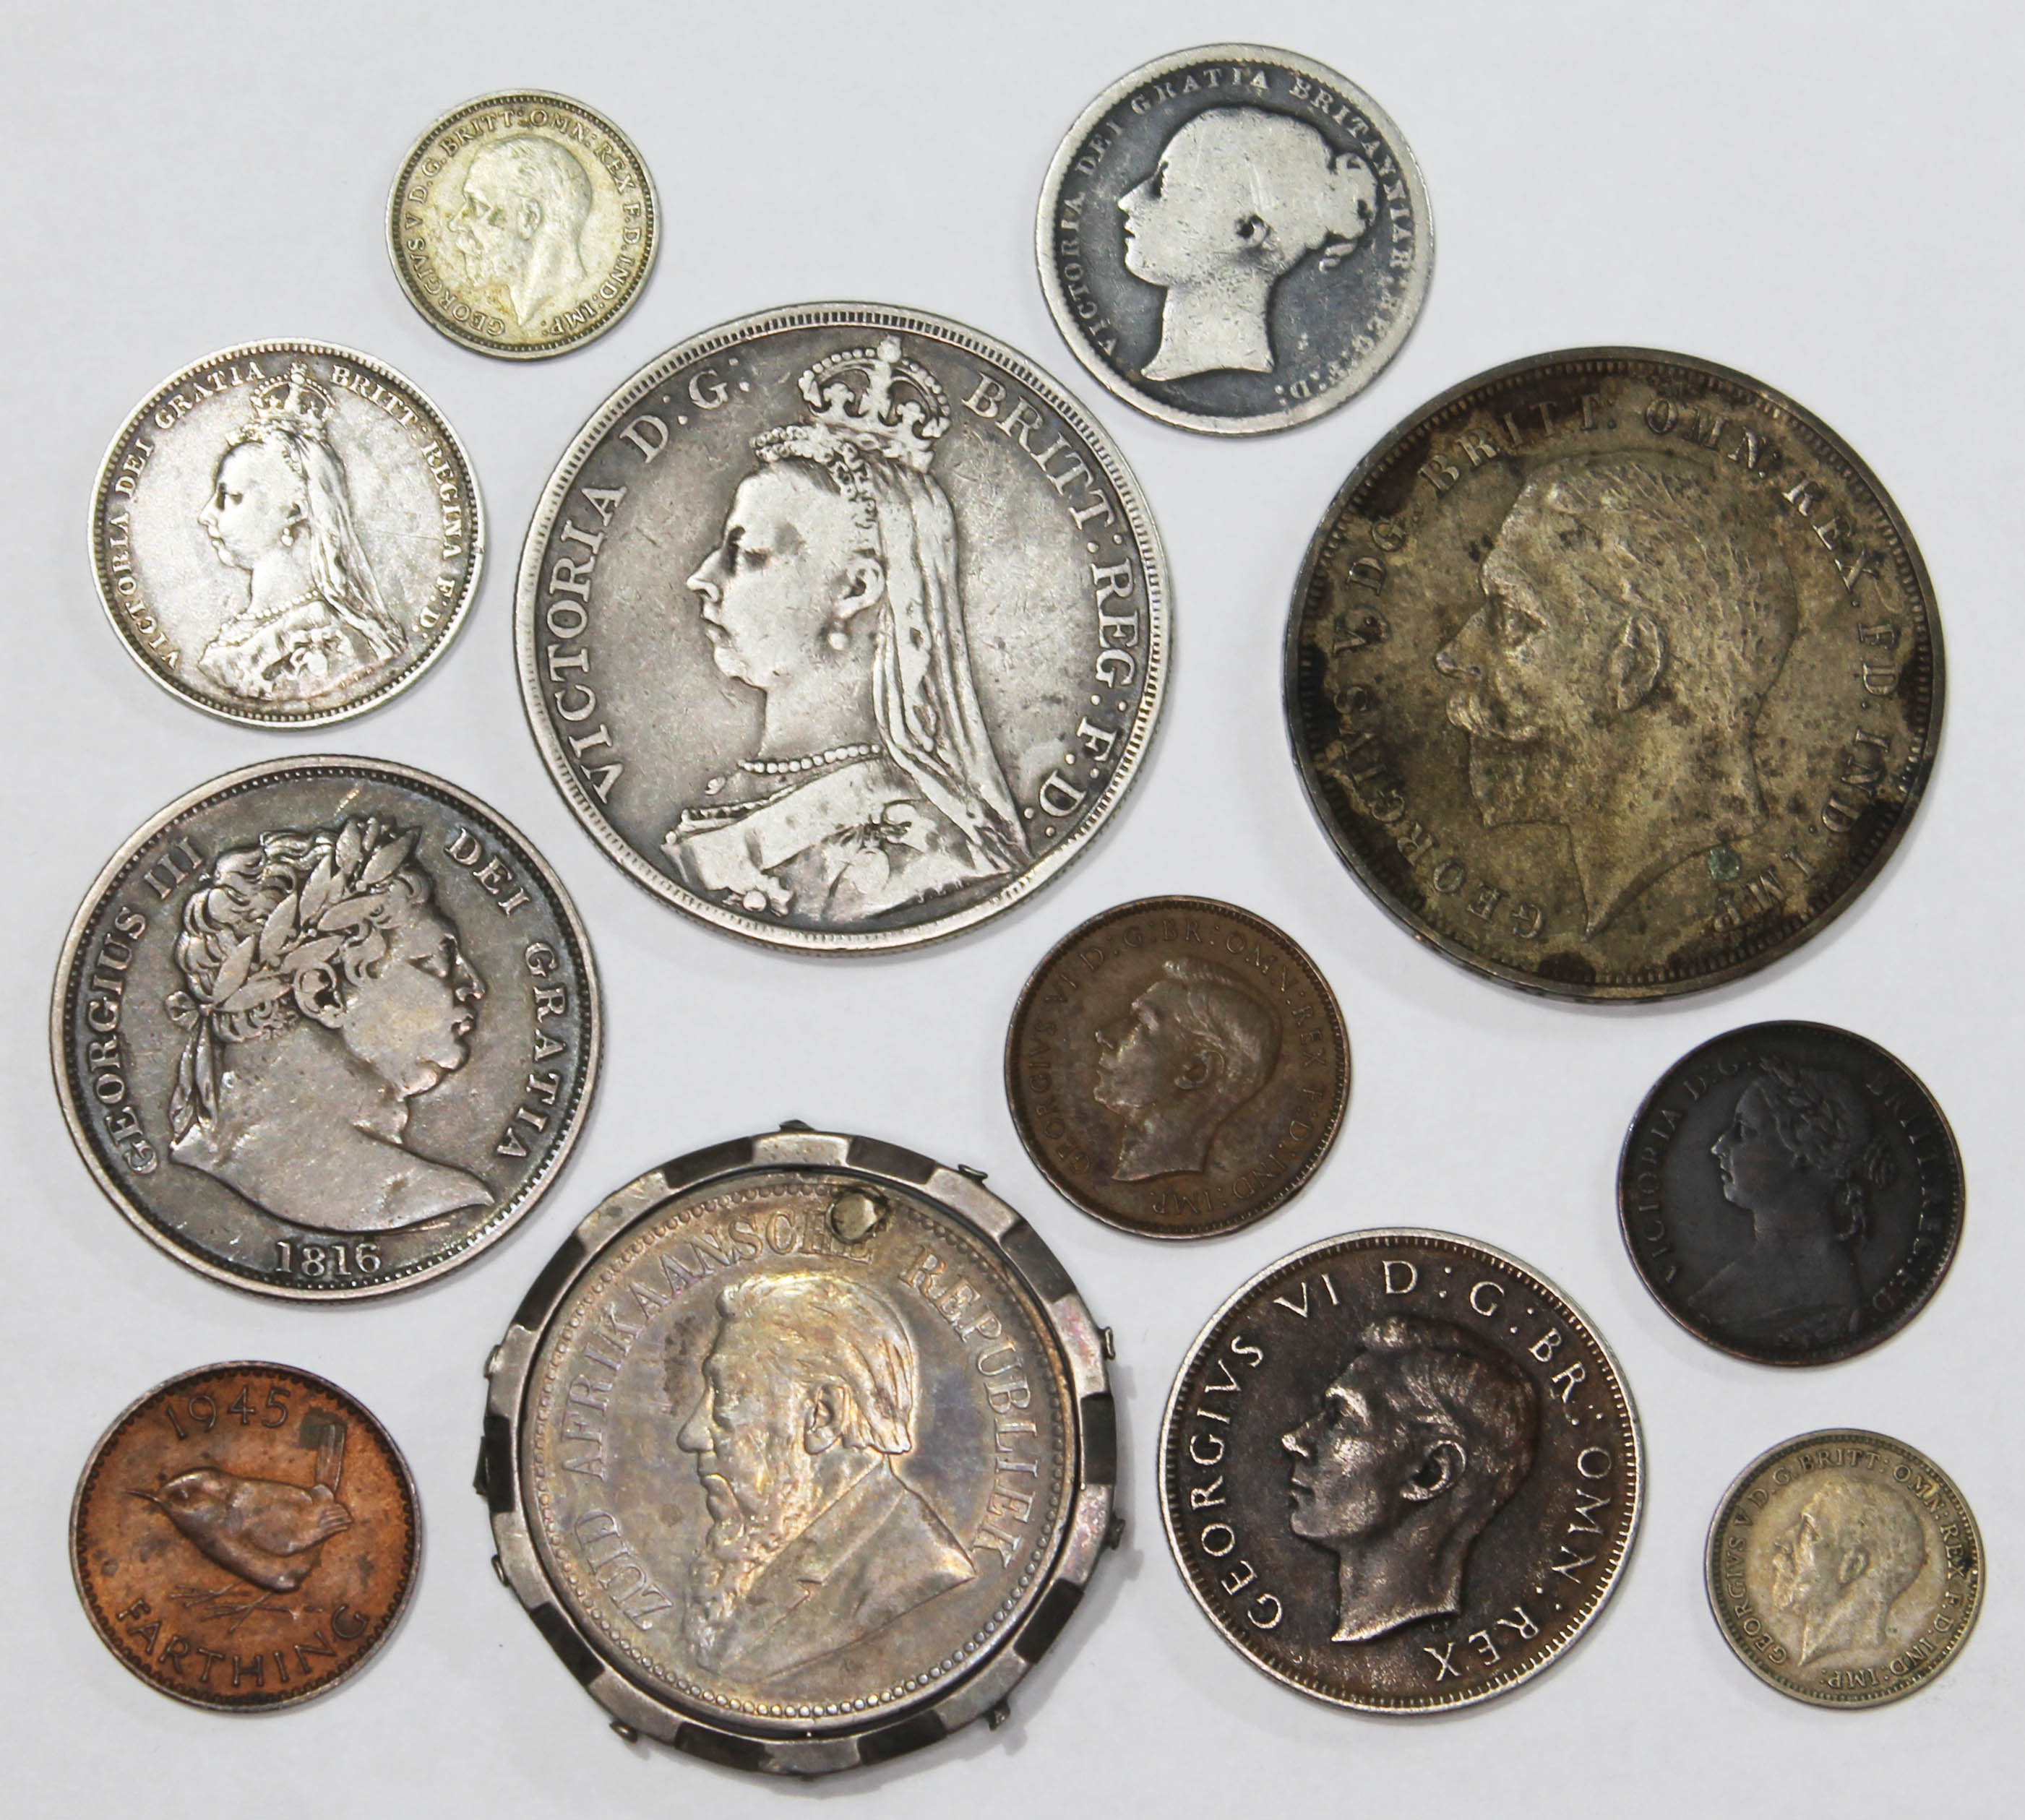 A small selection of GB coins including a Victoria 1889 crown, a George V 1935 crown, two Victoria